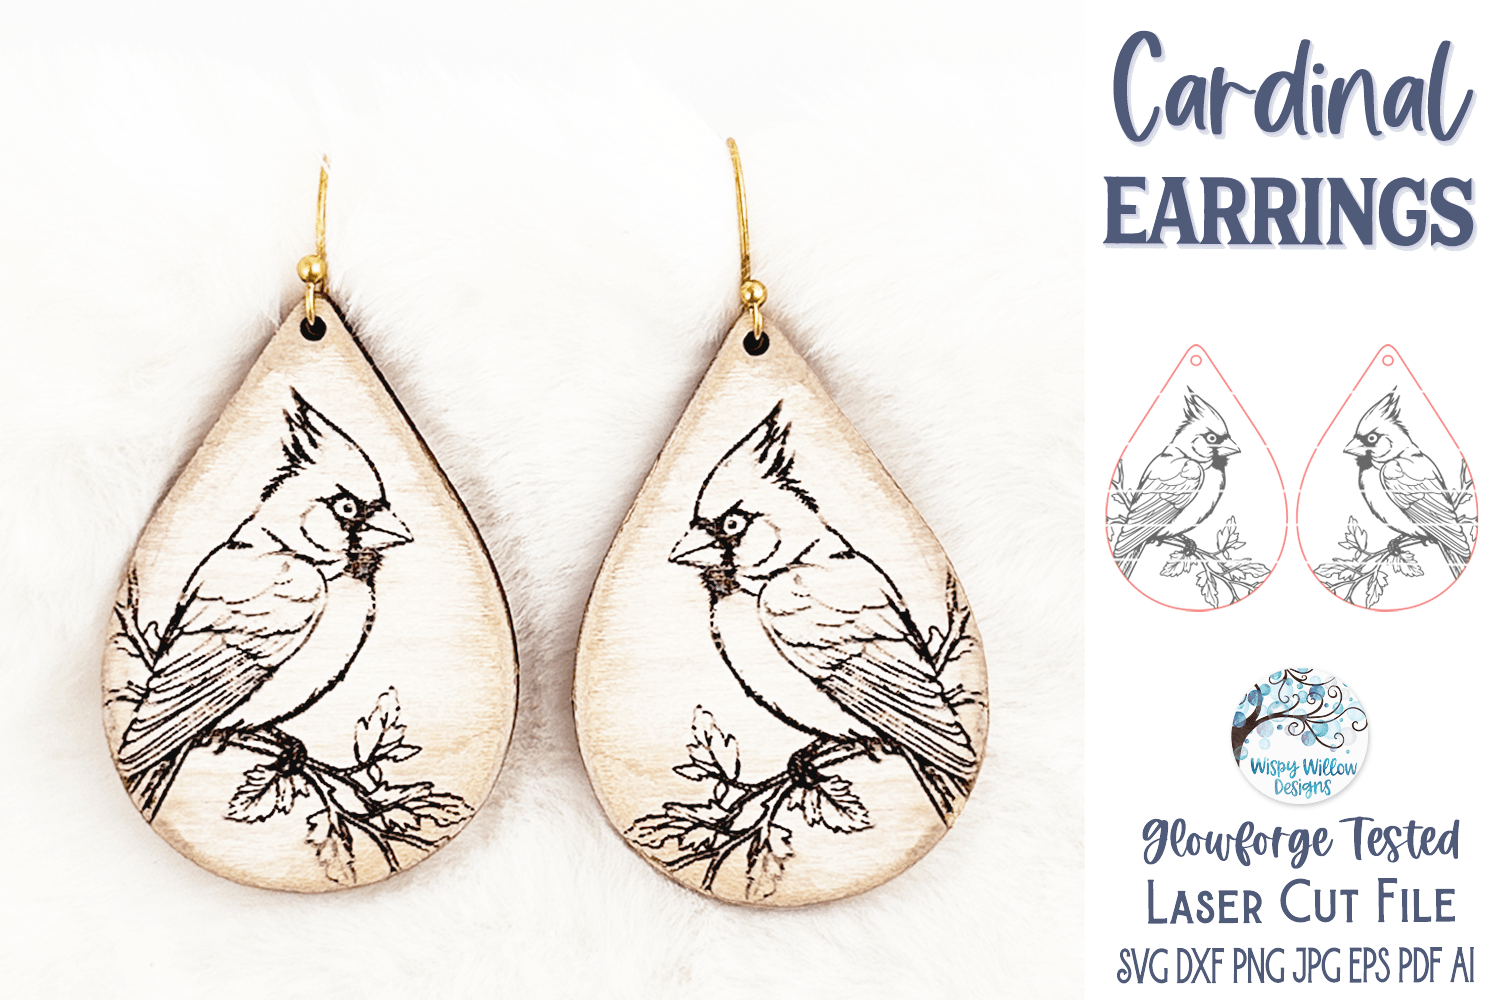 Cardinal Earring SVG File for Glowforge and Laser Cutter Wispy Willow Designs Company